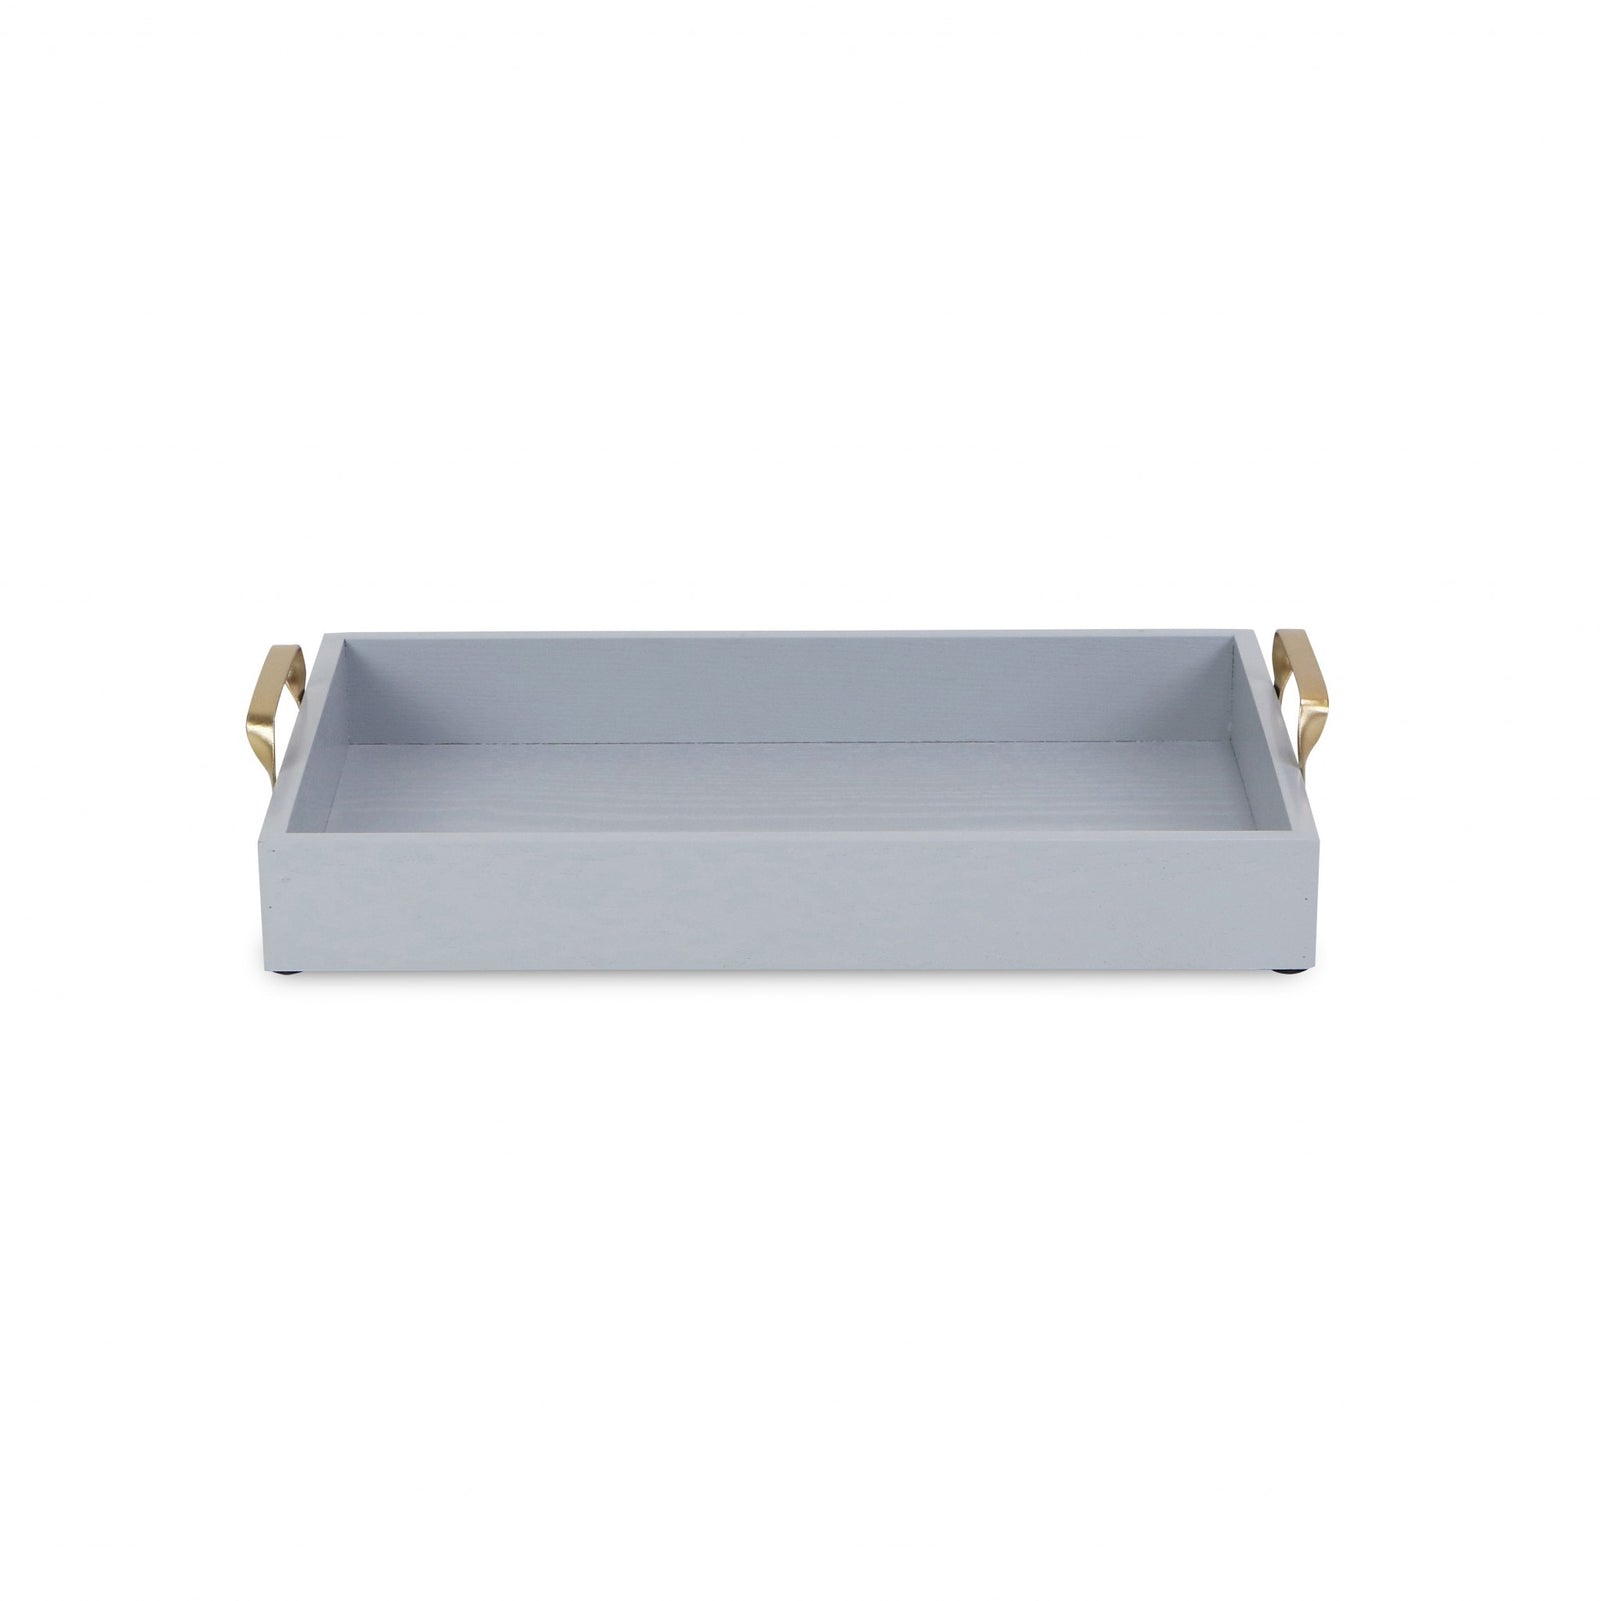 Light Gray Wooden Tray with Gold Handles